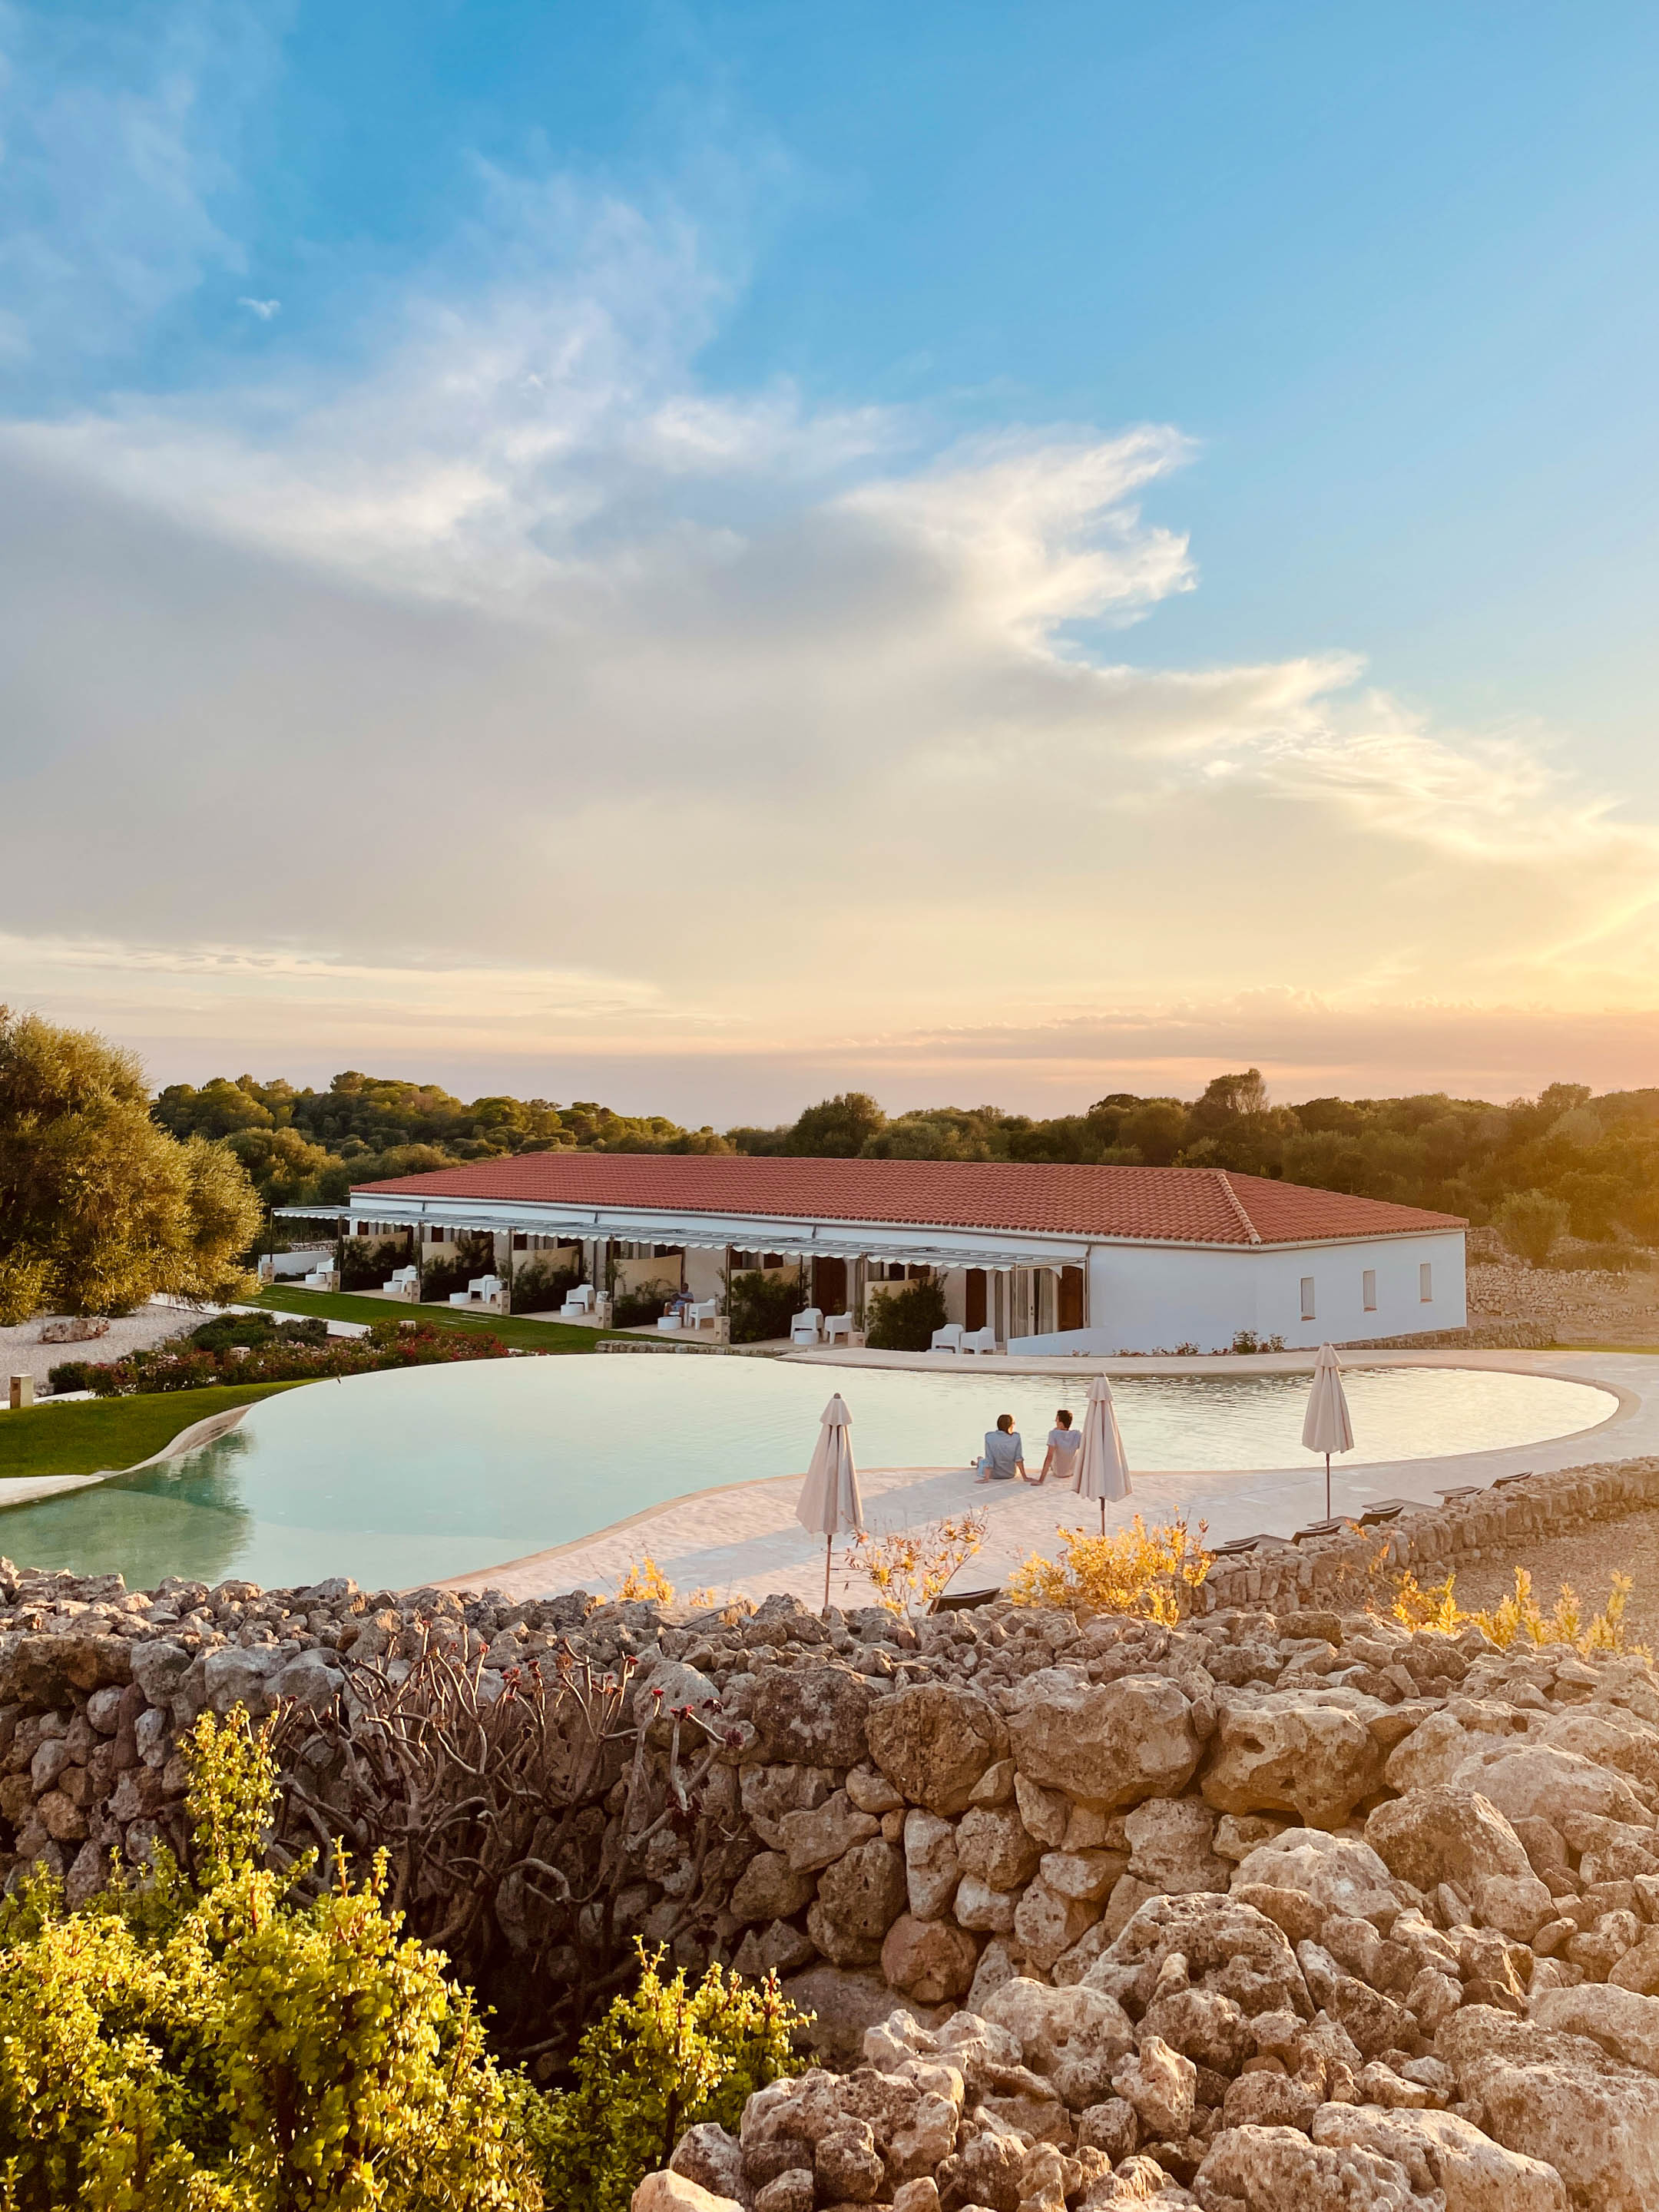 Travel and Lifestyle Photographer - Menorca Spain Luxury Hotel at Sunset over Pool